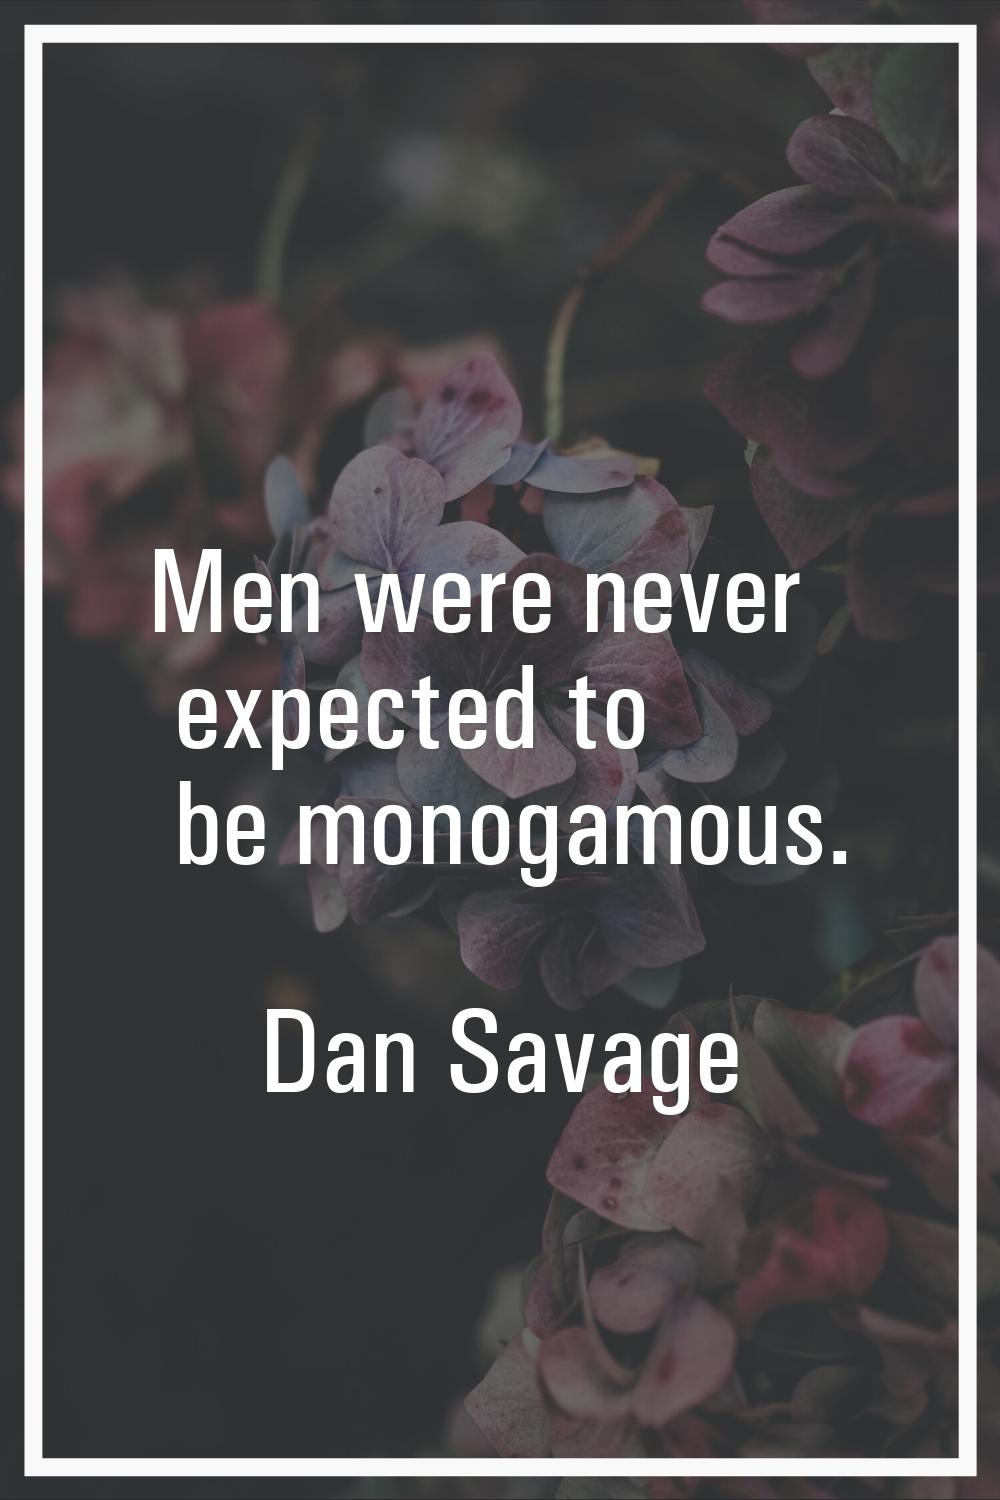 Men were never expected to be monogamous.